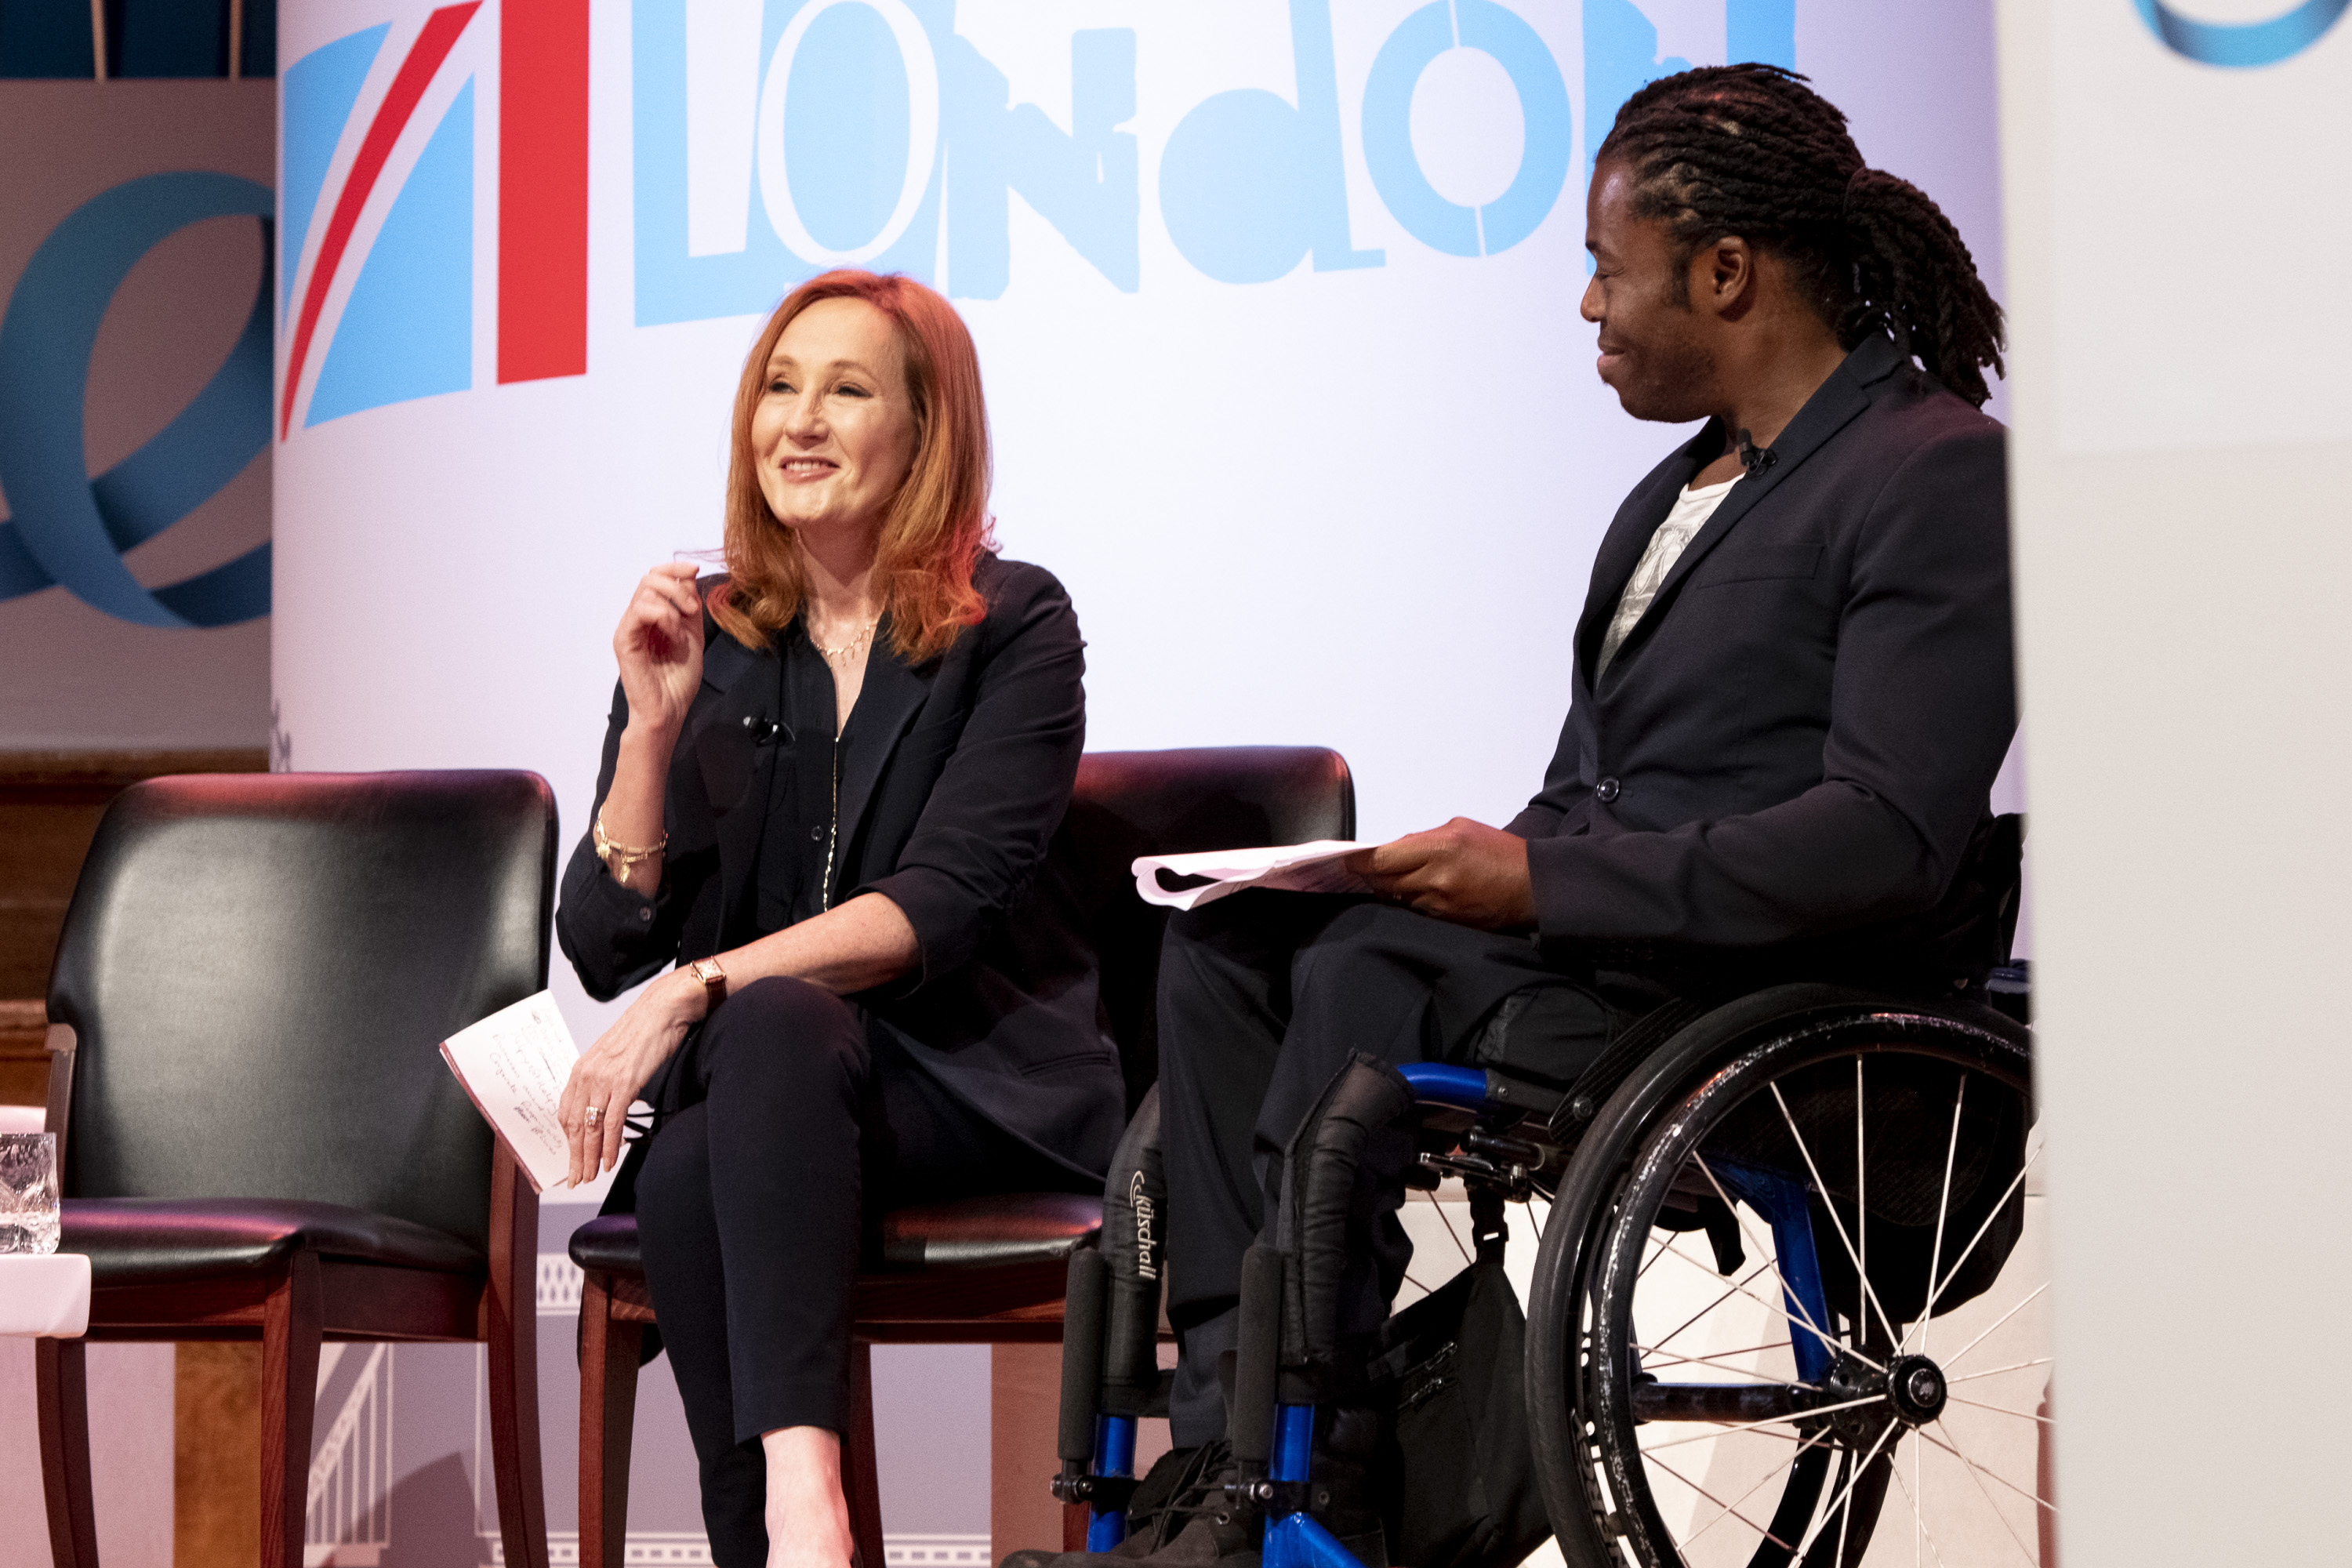 The author J.K. Rowling alongside U.K. paralympian Ade Adepitan at the One Young World global forum in London on Oct. 24 (Richard Hanson—HansonImages)